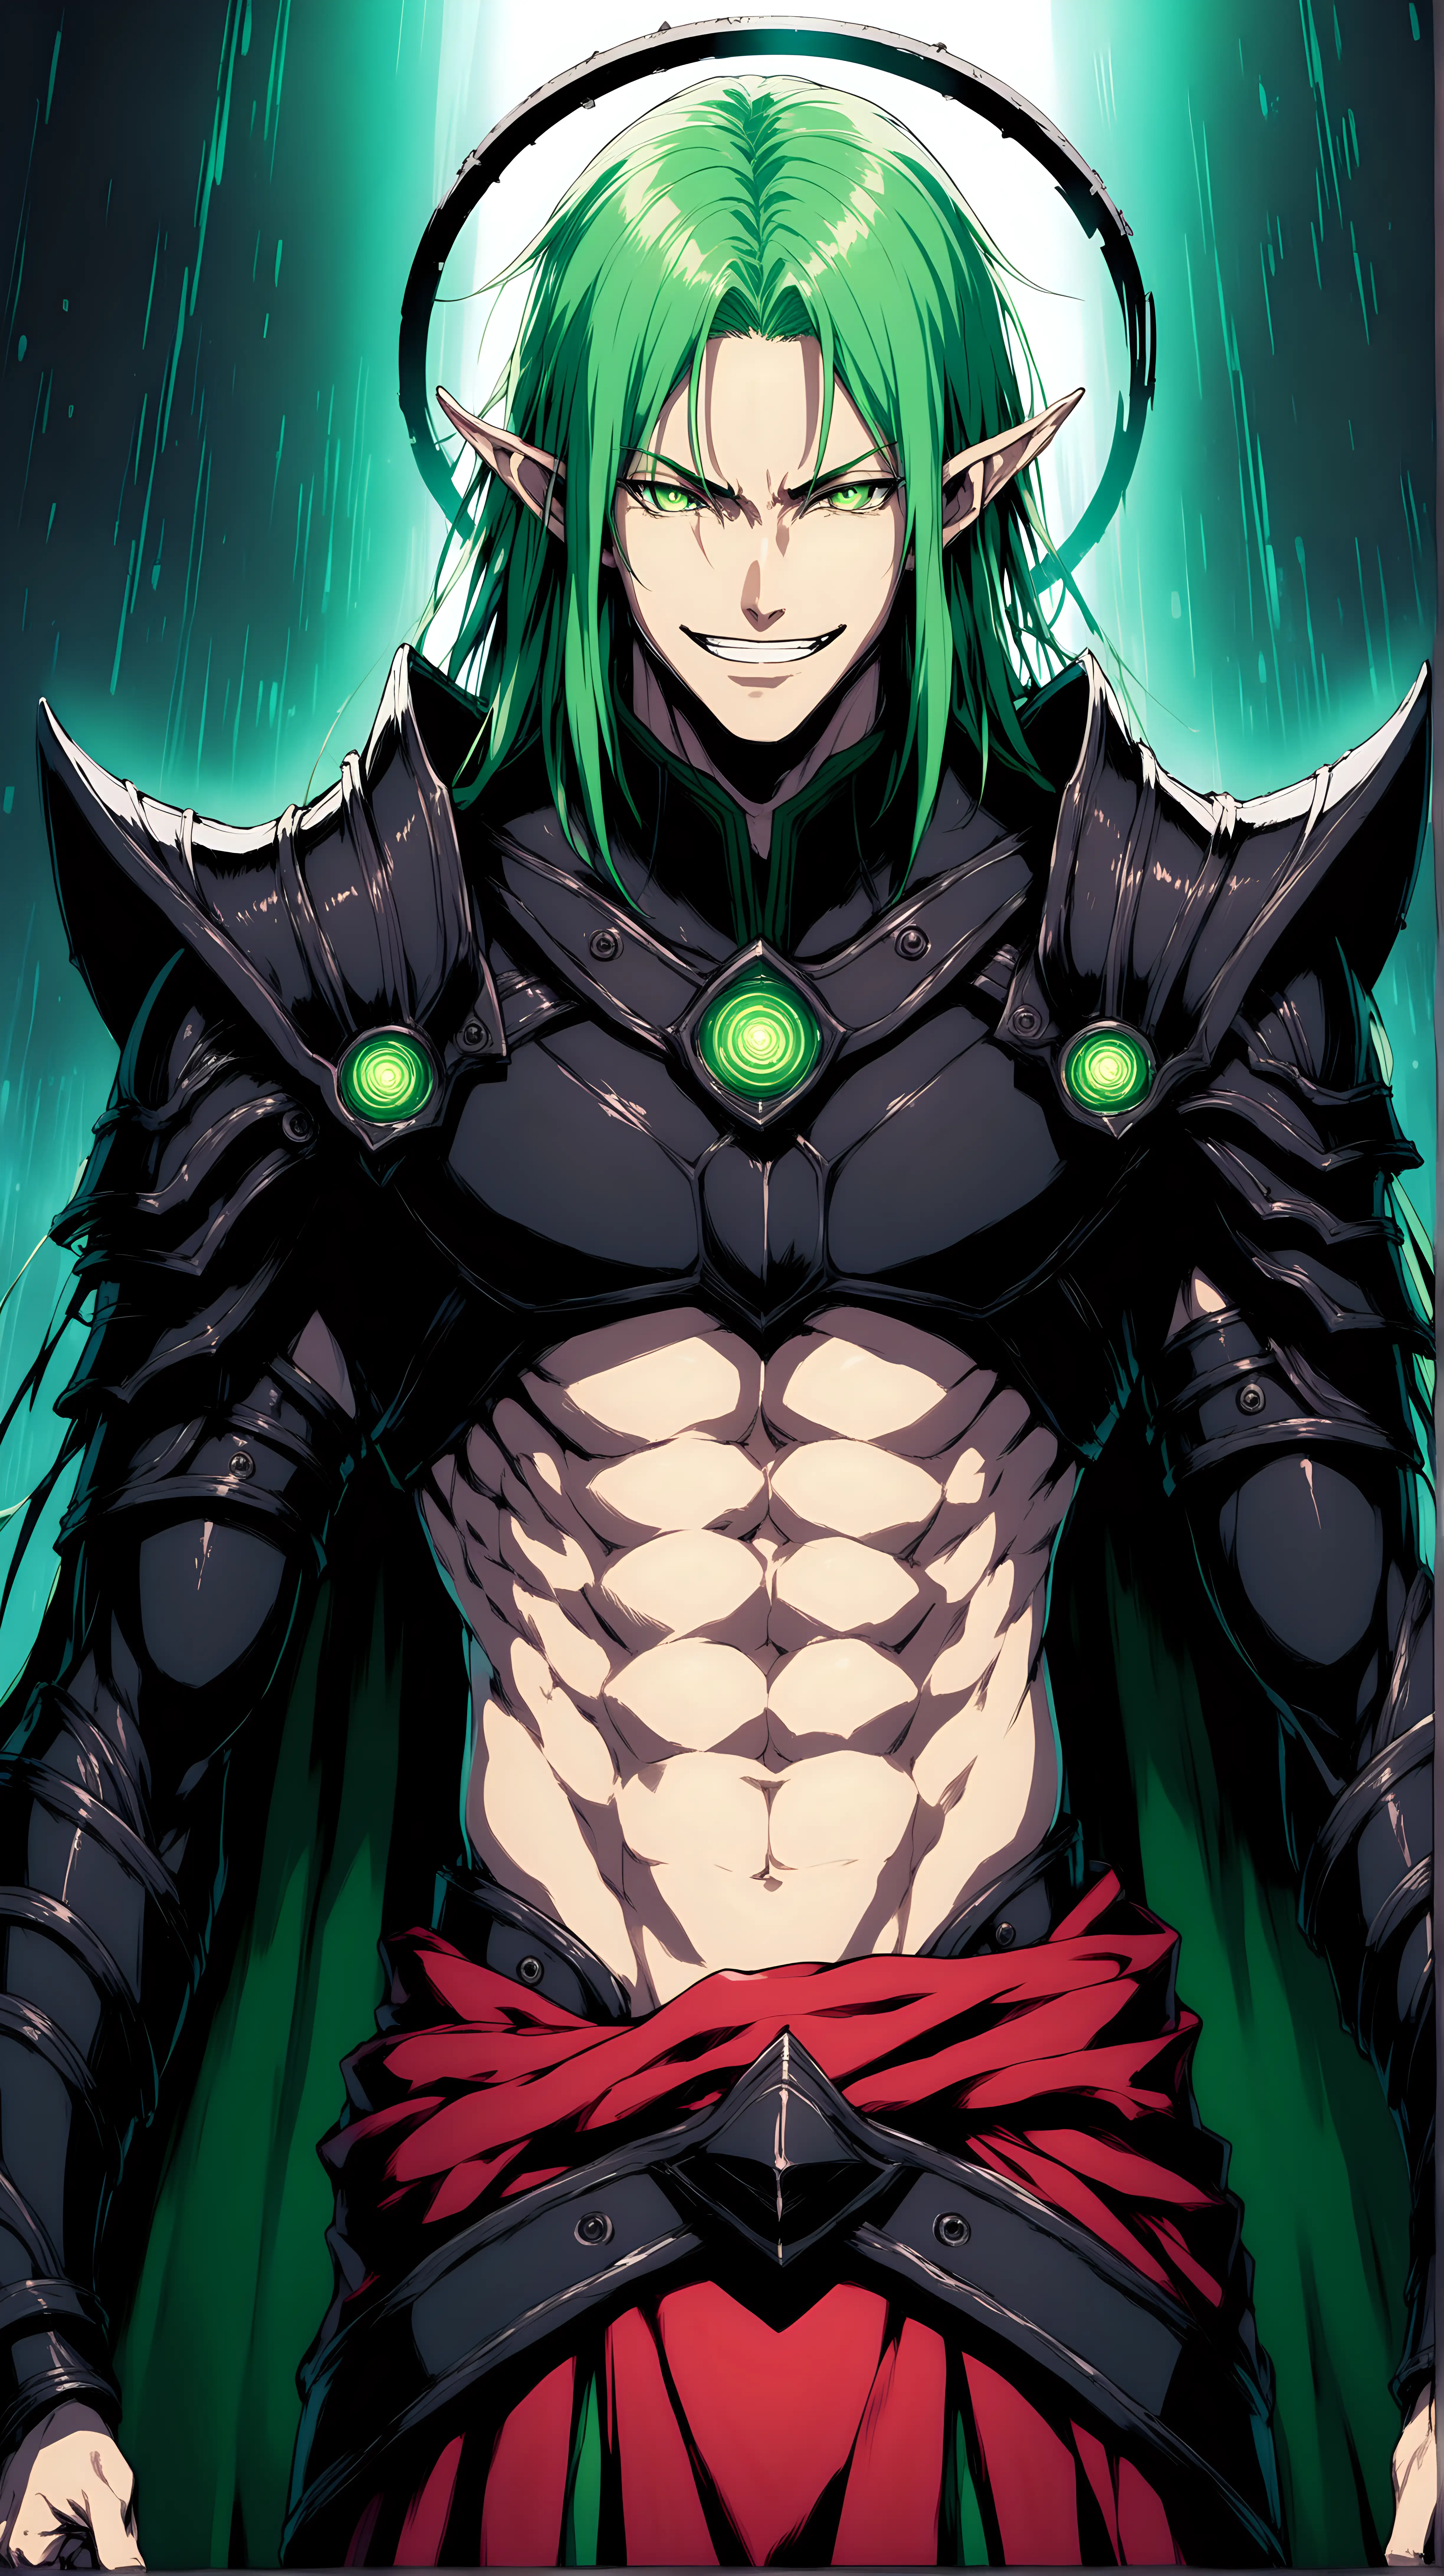 Intense Male Elf Warrior with Yandere Expression in Gothic Armor